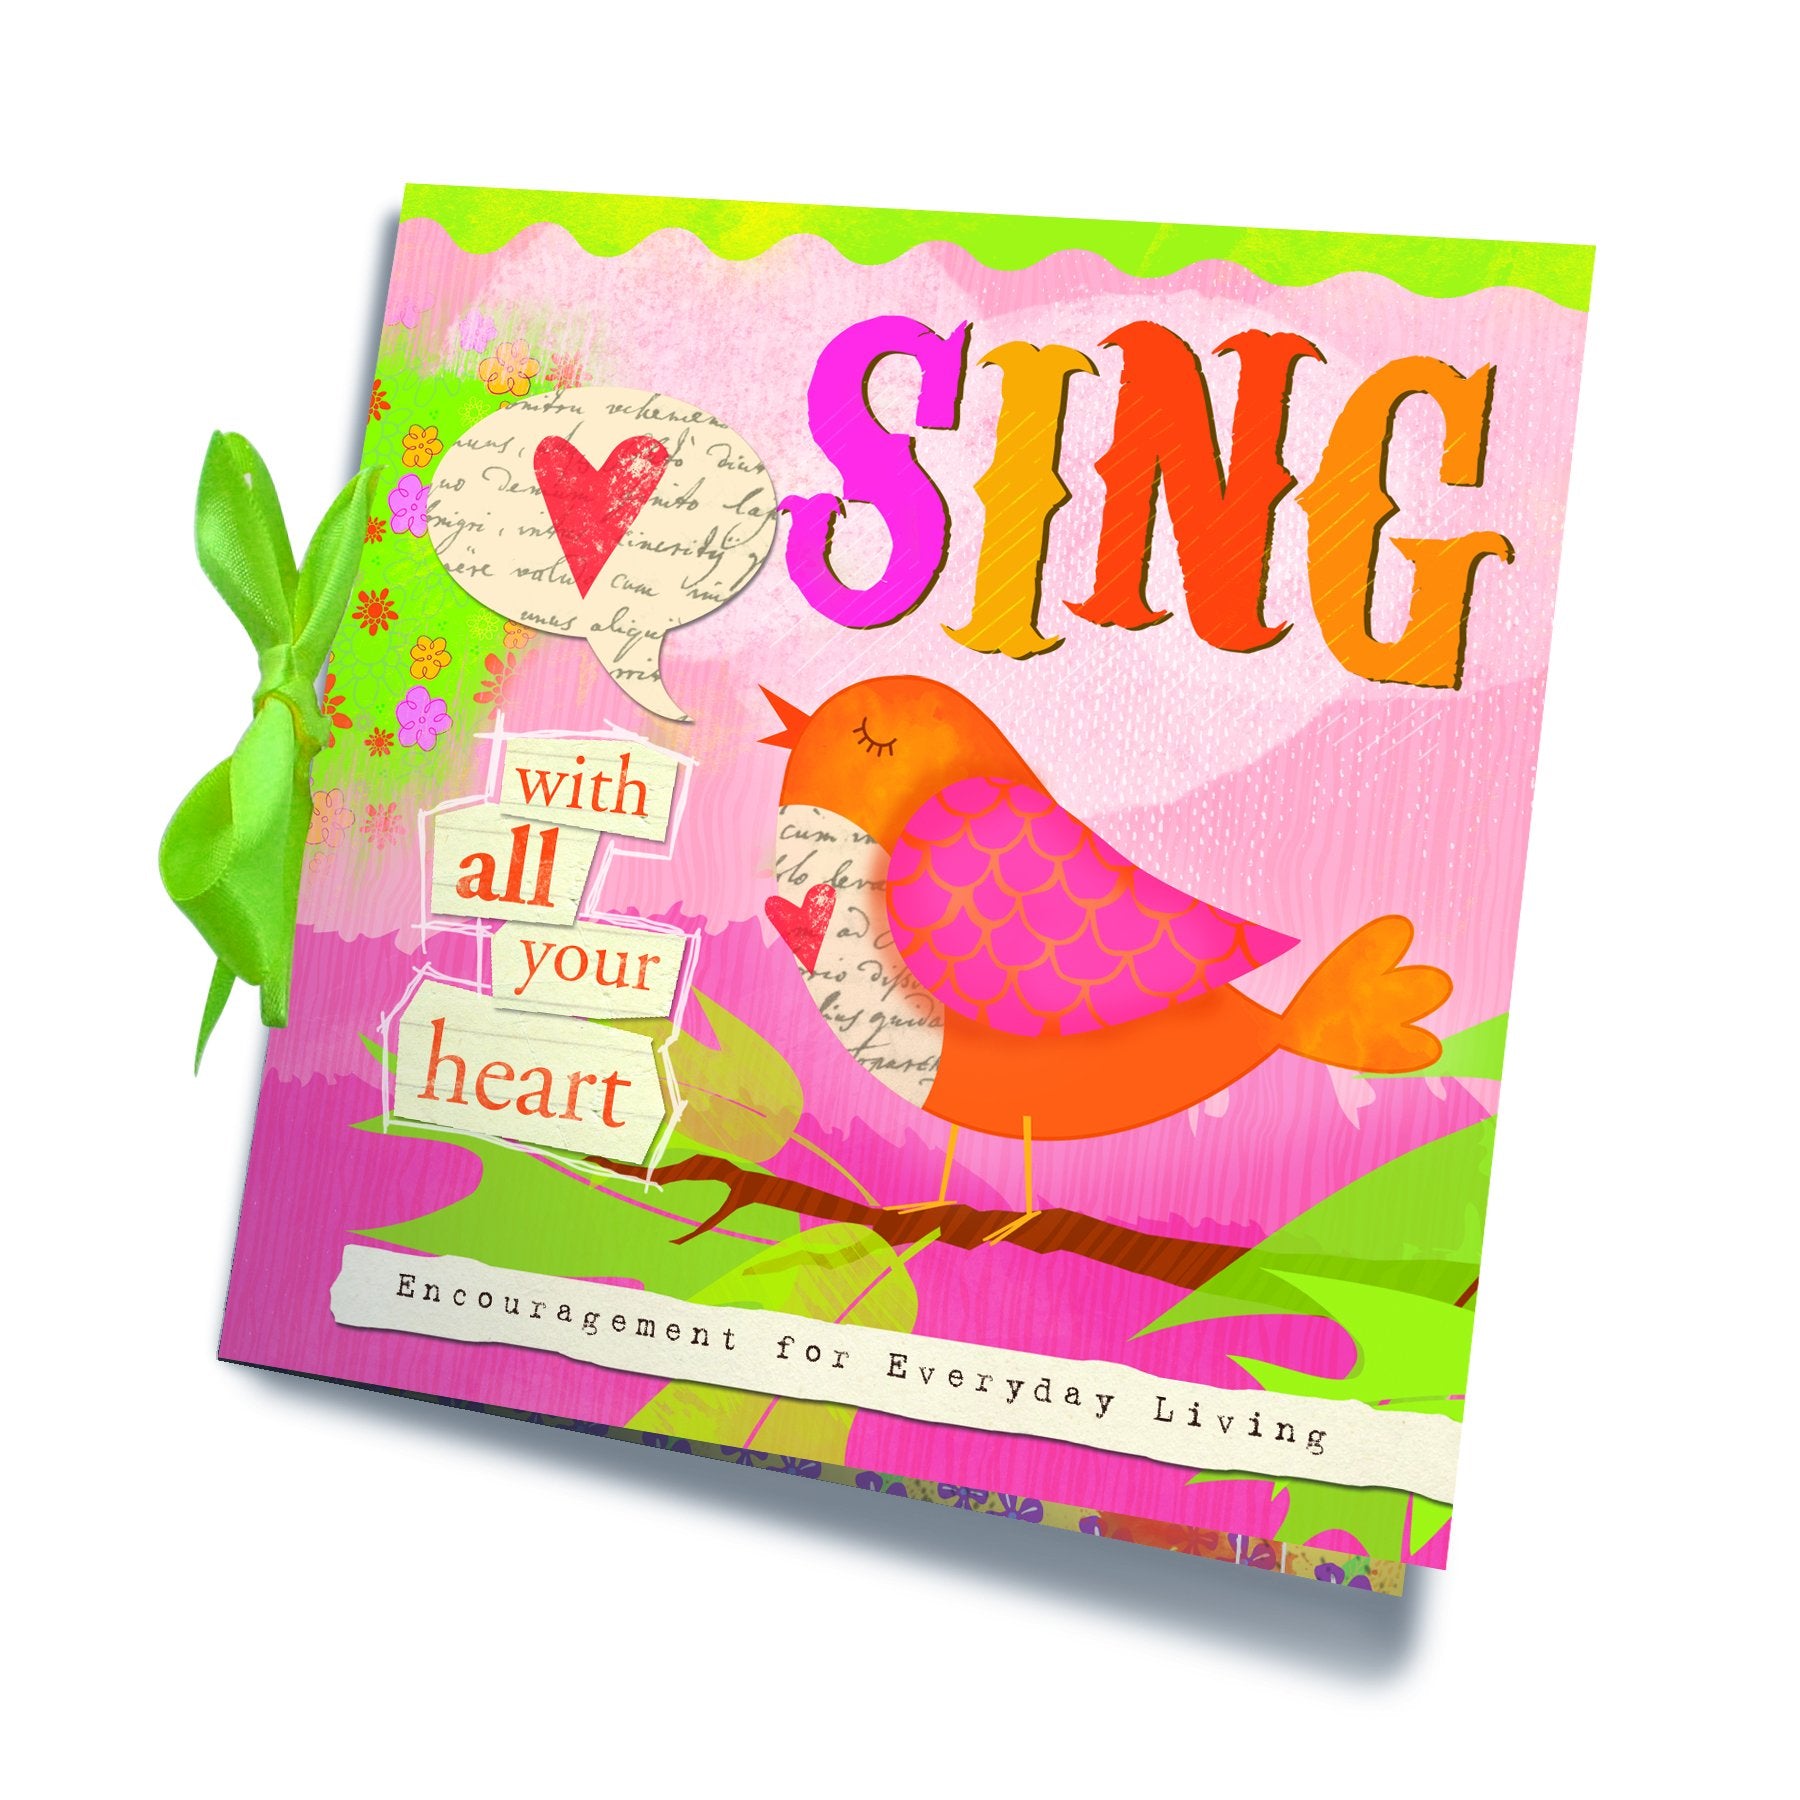 Divinity Boutique Inspired Grace: 12 Encouragement Booklets With Free Cardboard Display